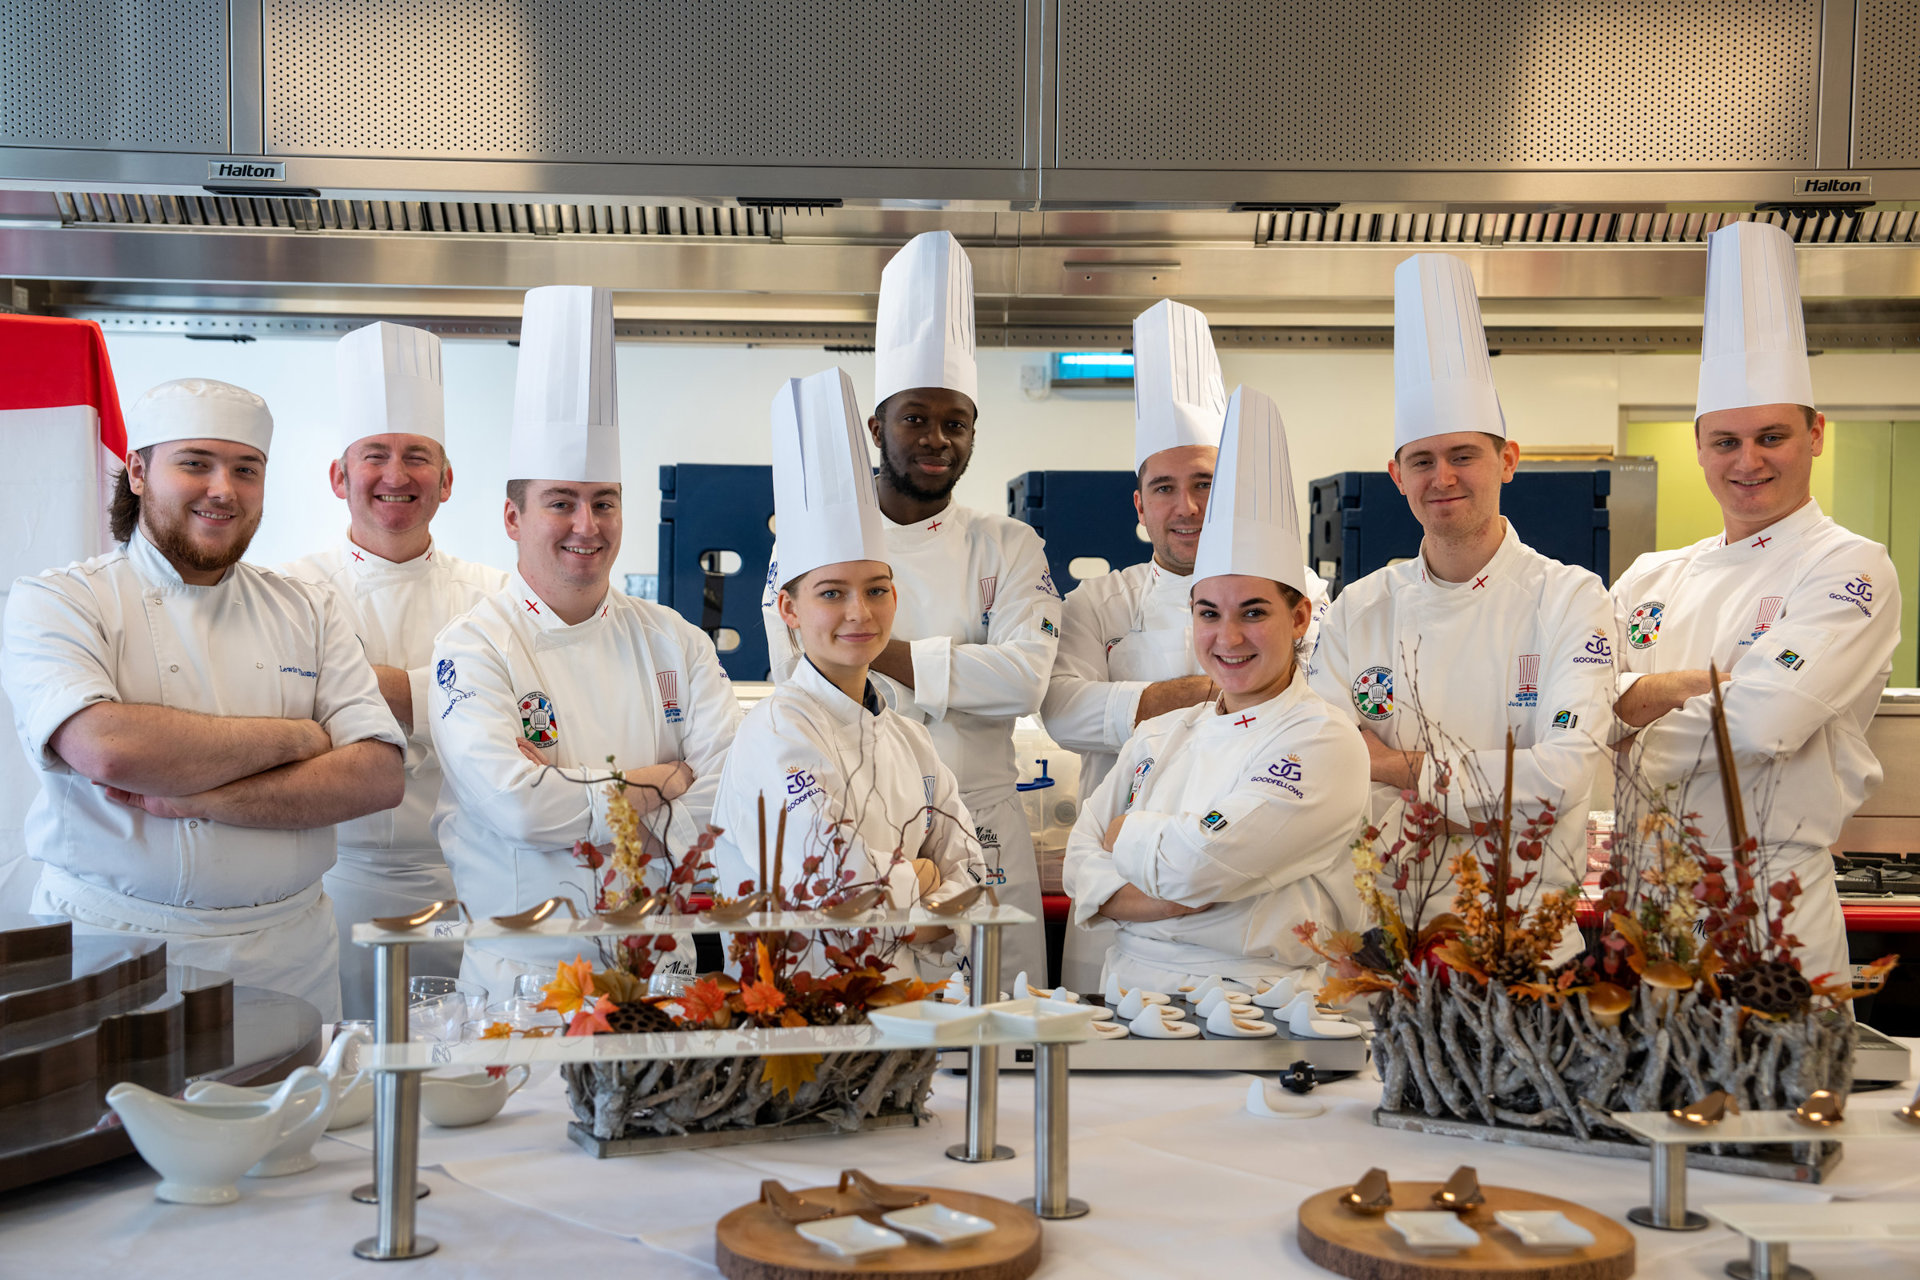 England chefs jet off to Culinary World Cup News University College